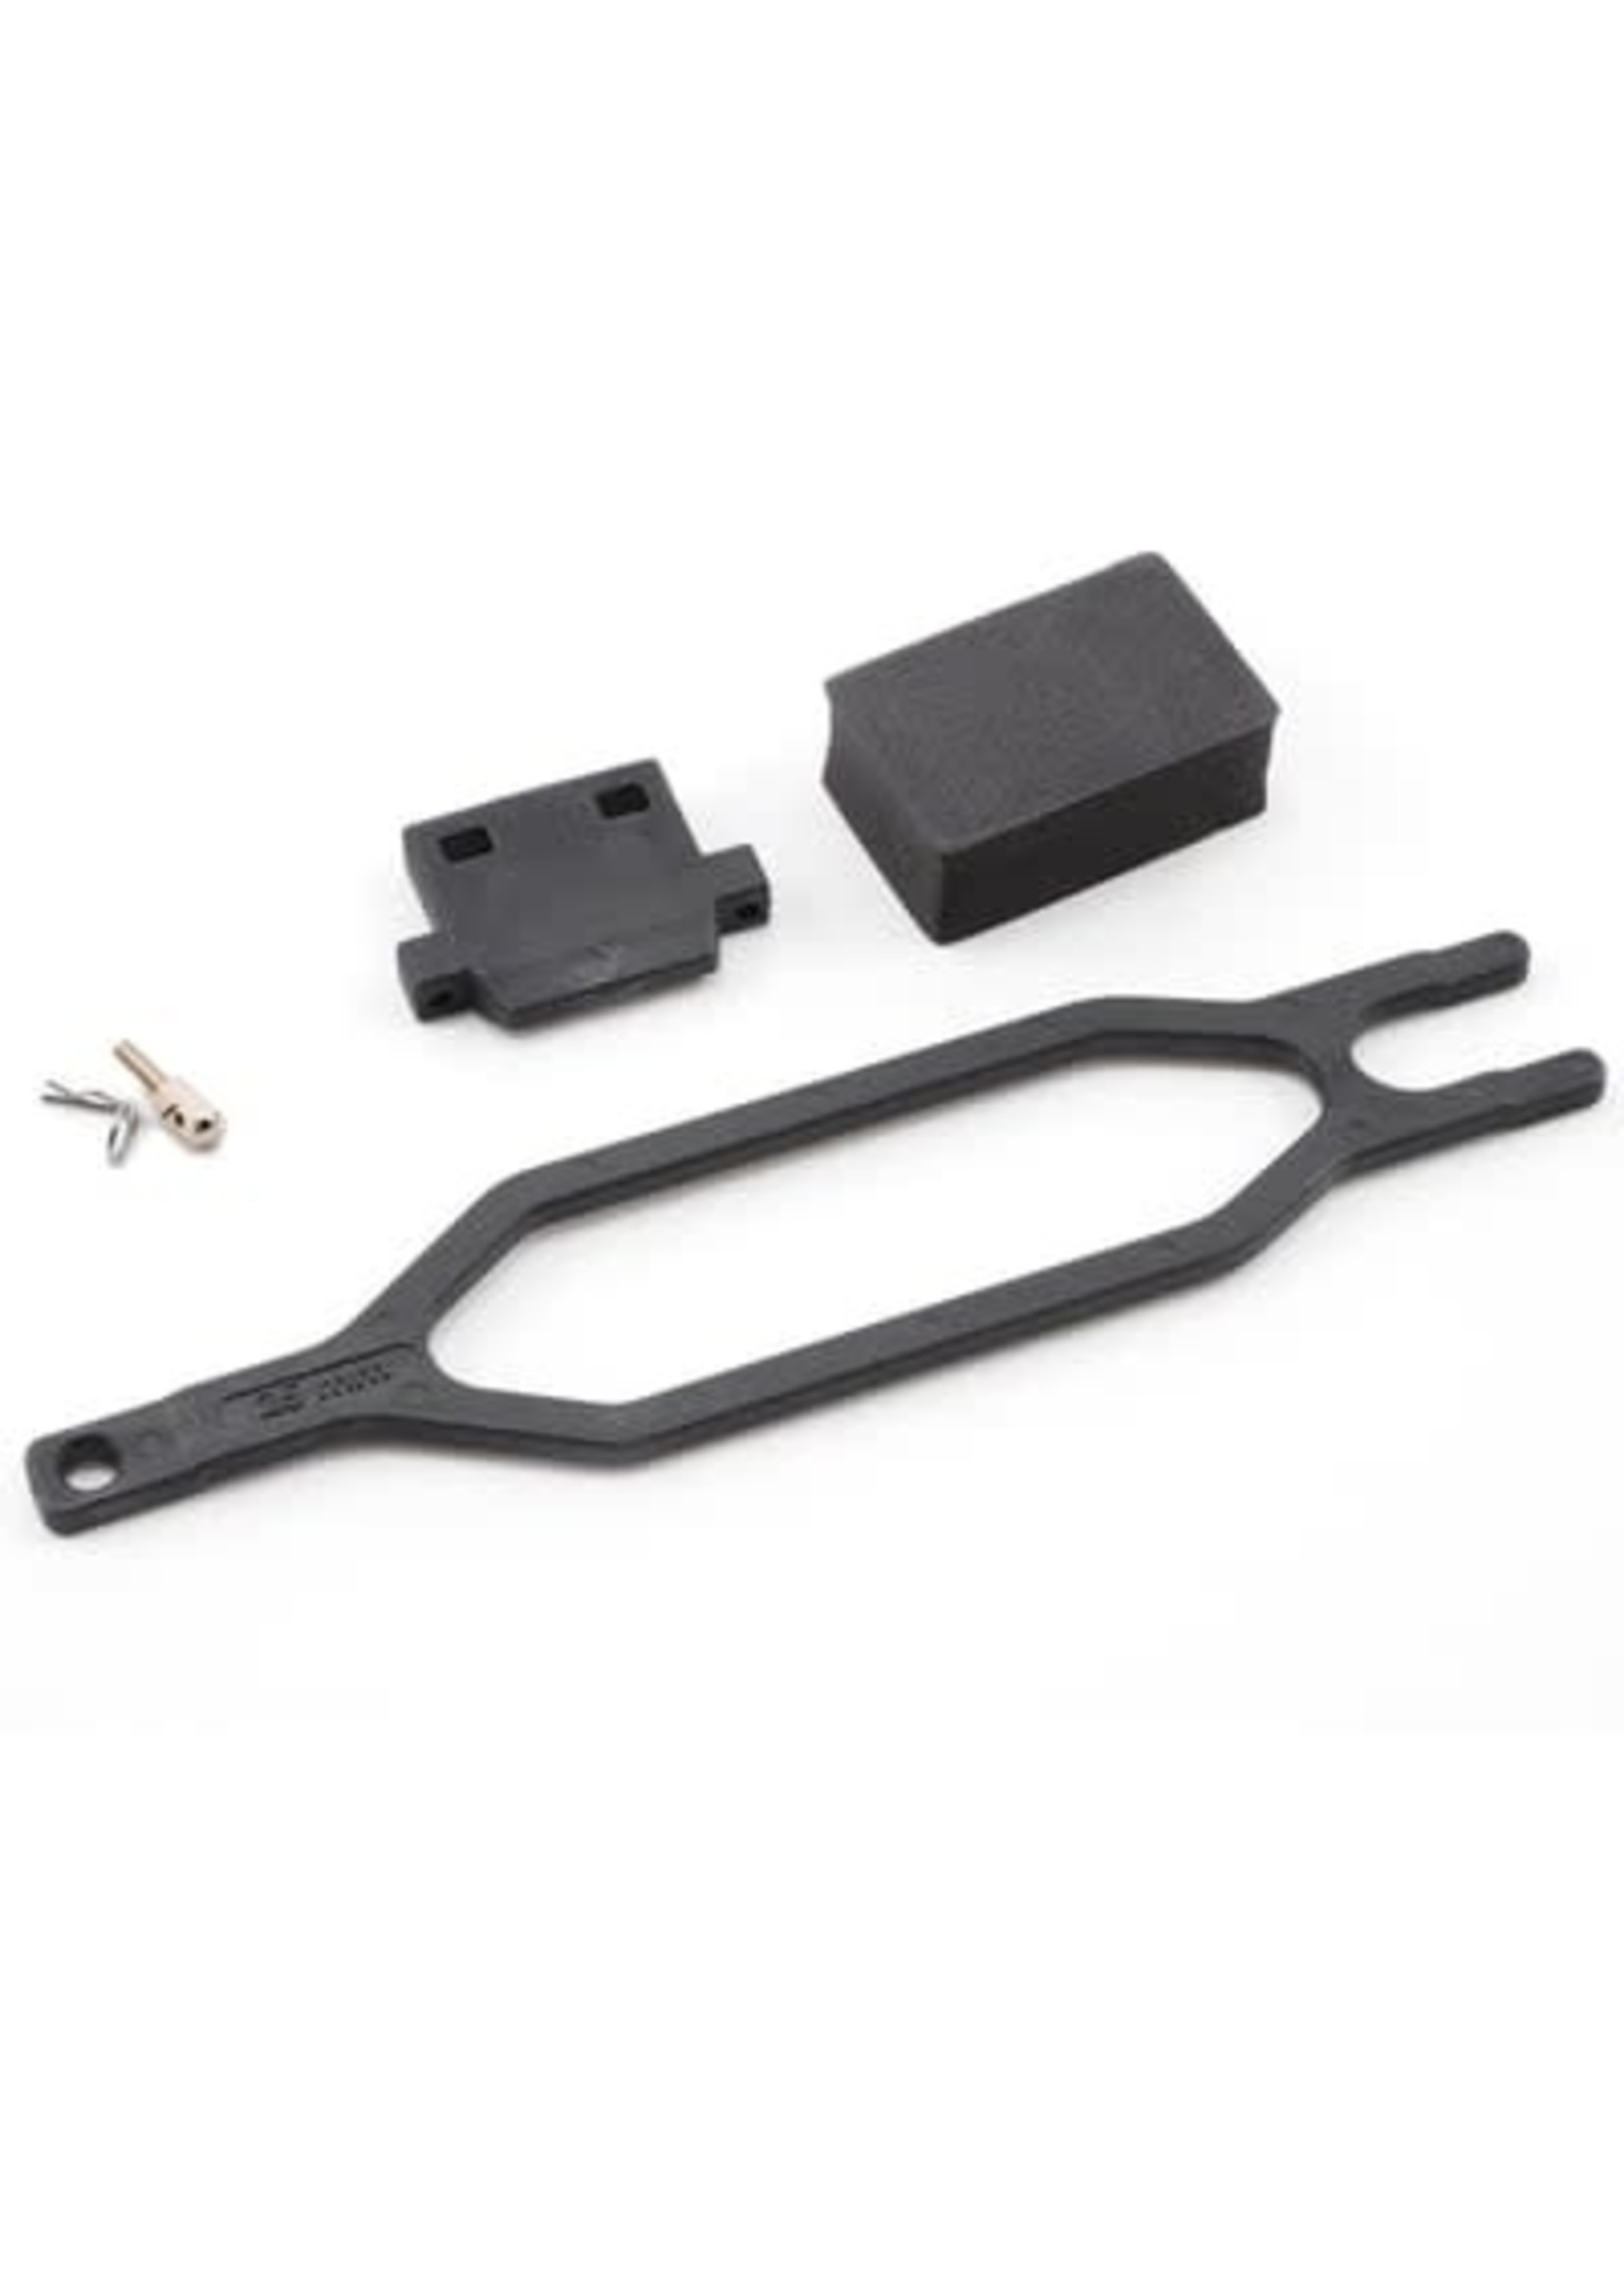 Traxxas 5827 Hold down, battery/ hold down retainer/ battery post/ foam spacer/ angled body clip